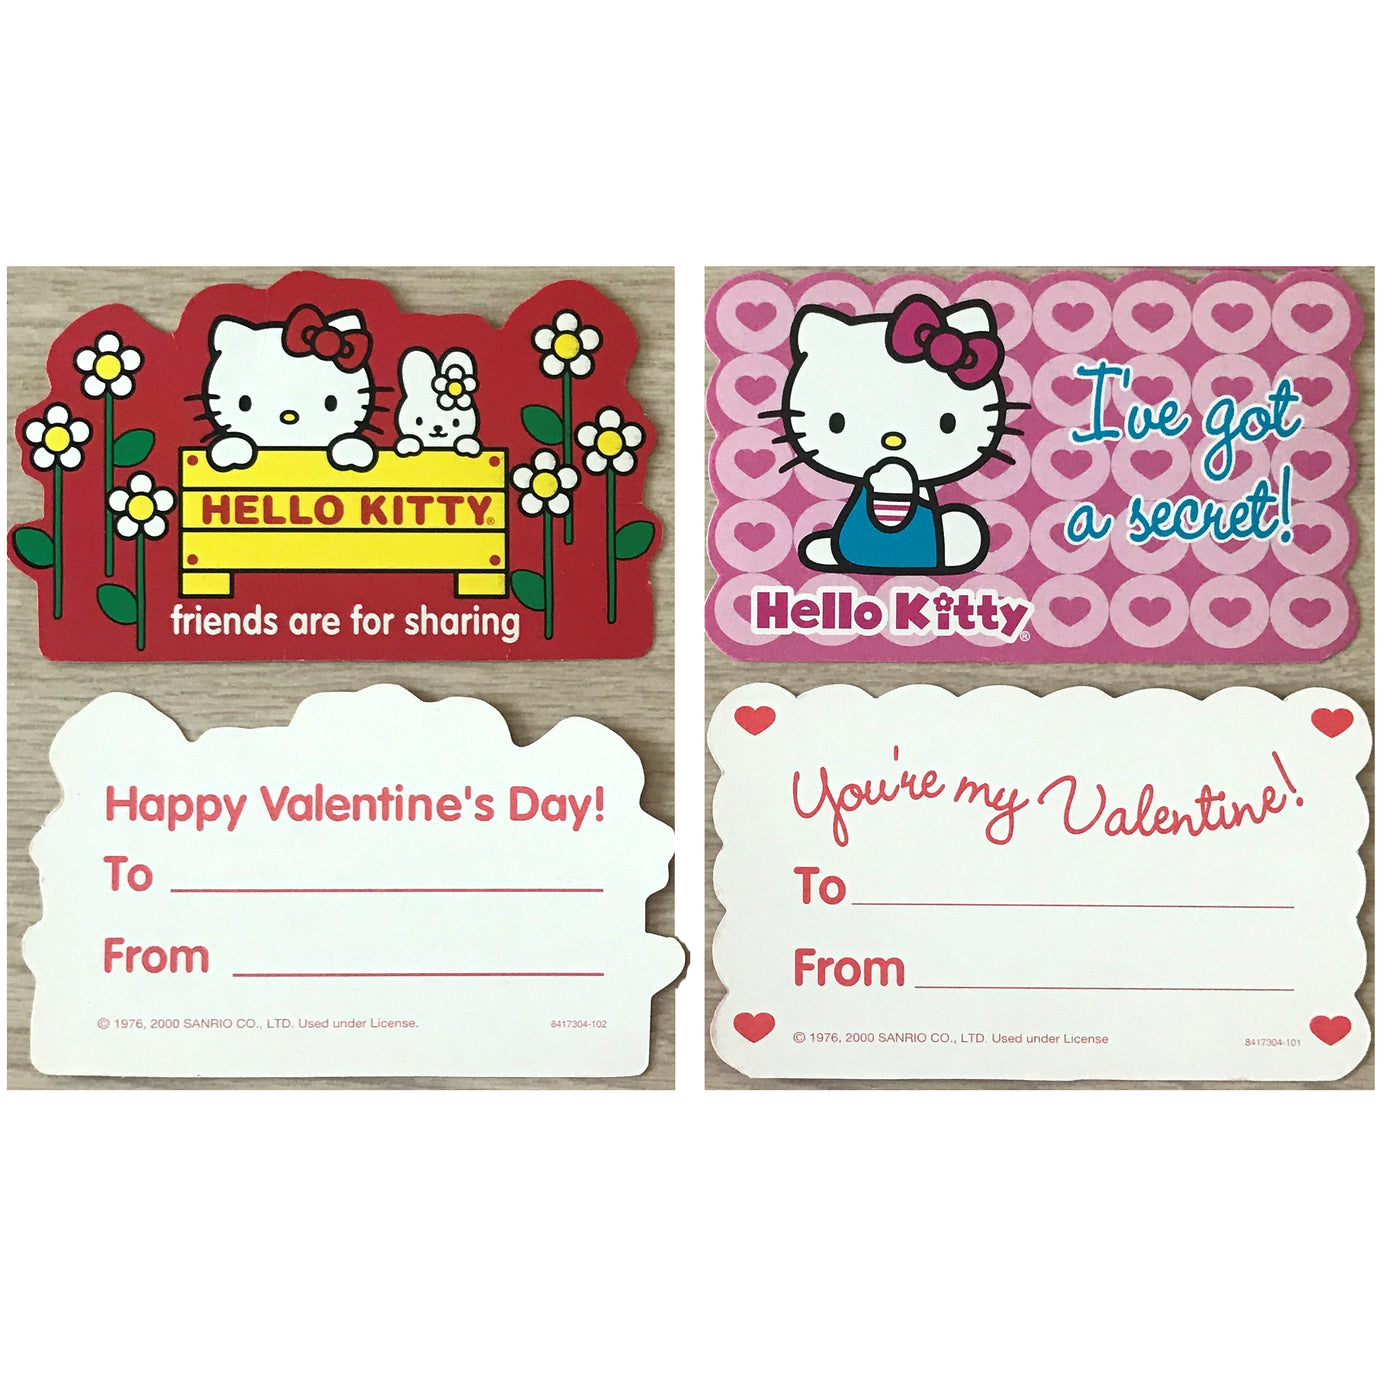 Adorable Hello Kitty Valentine Cards for Your Loved Ones